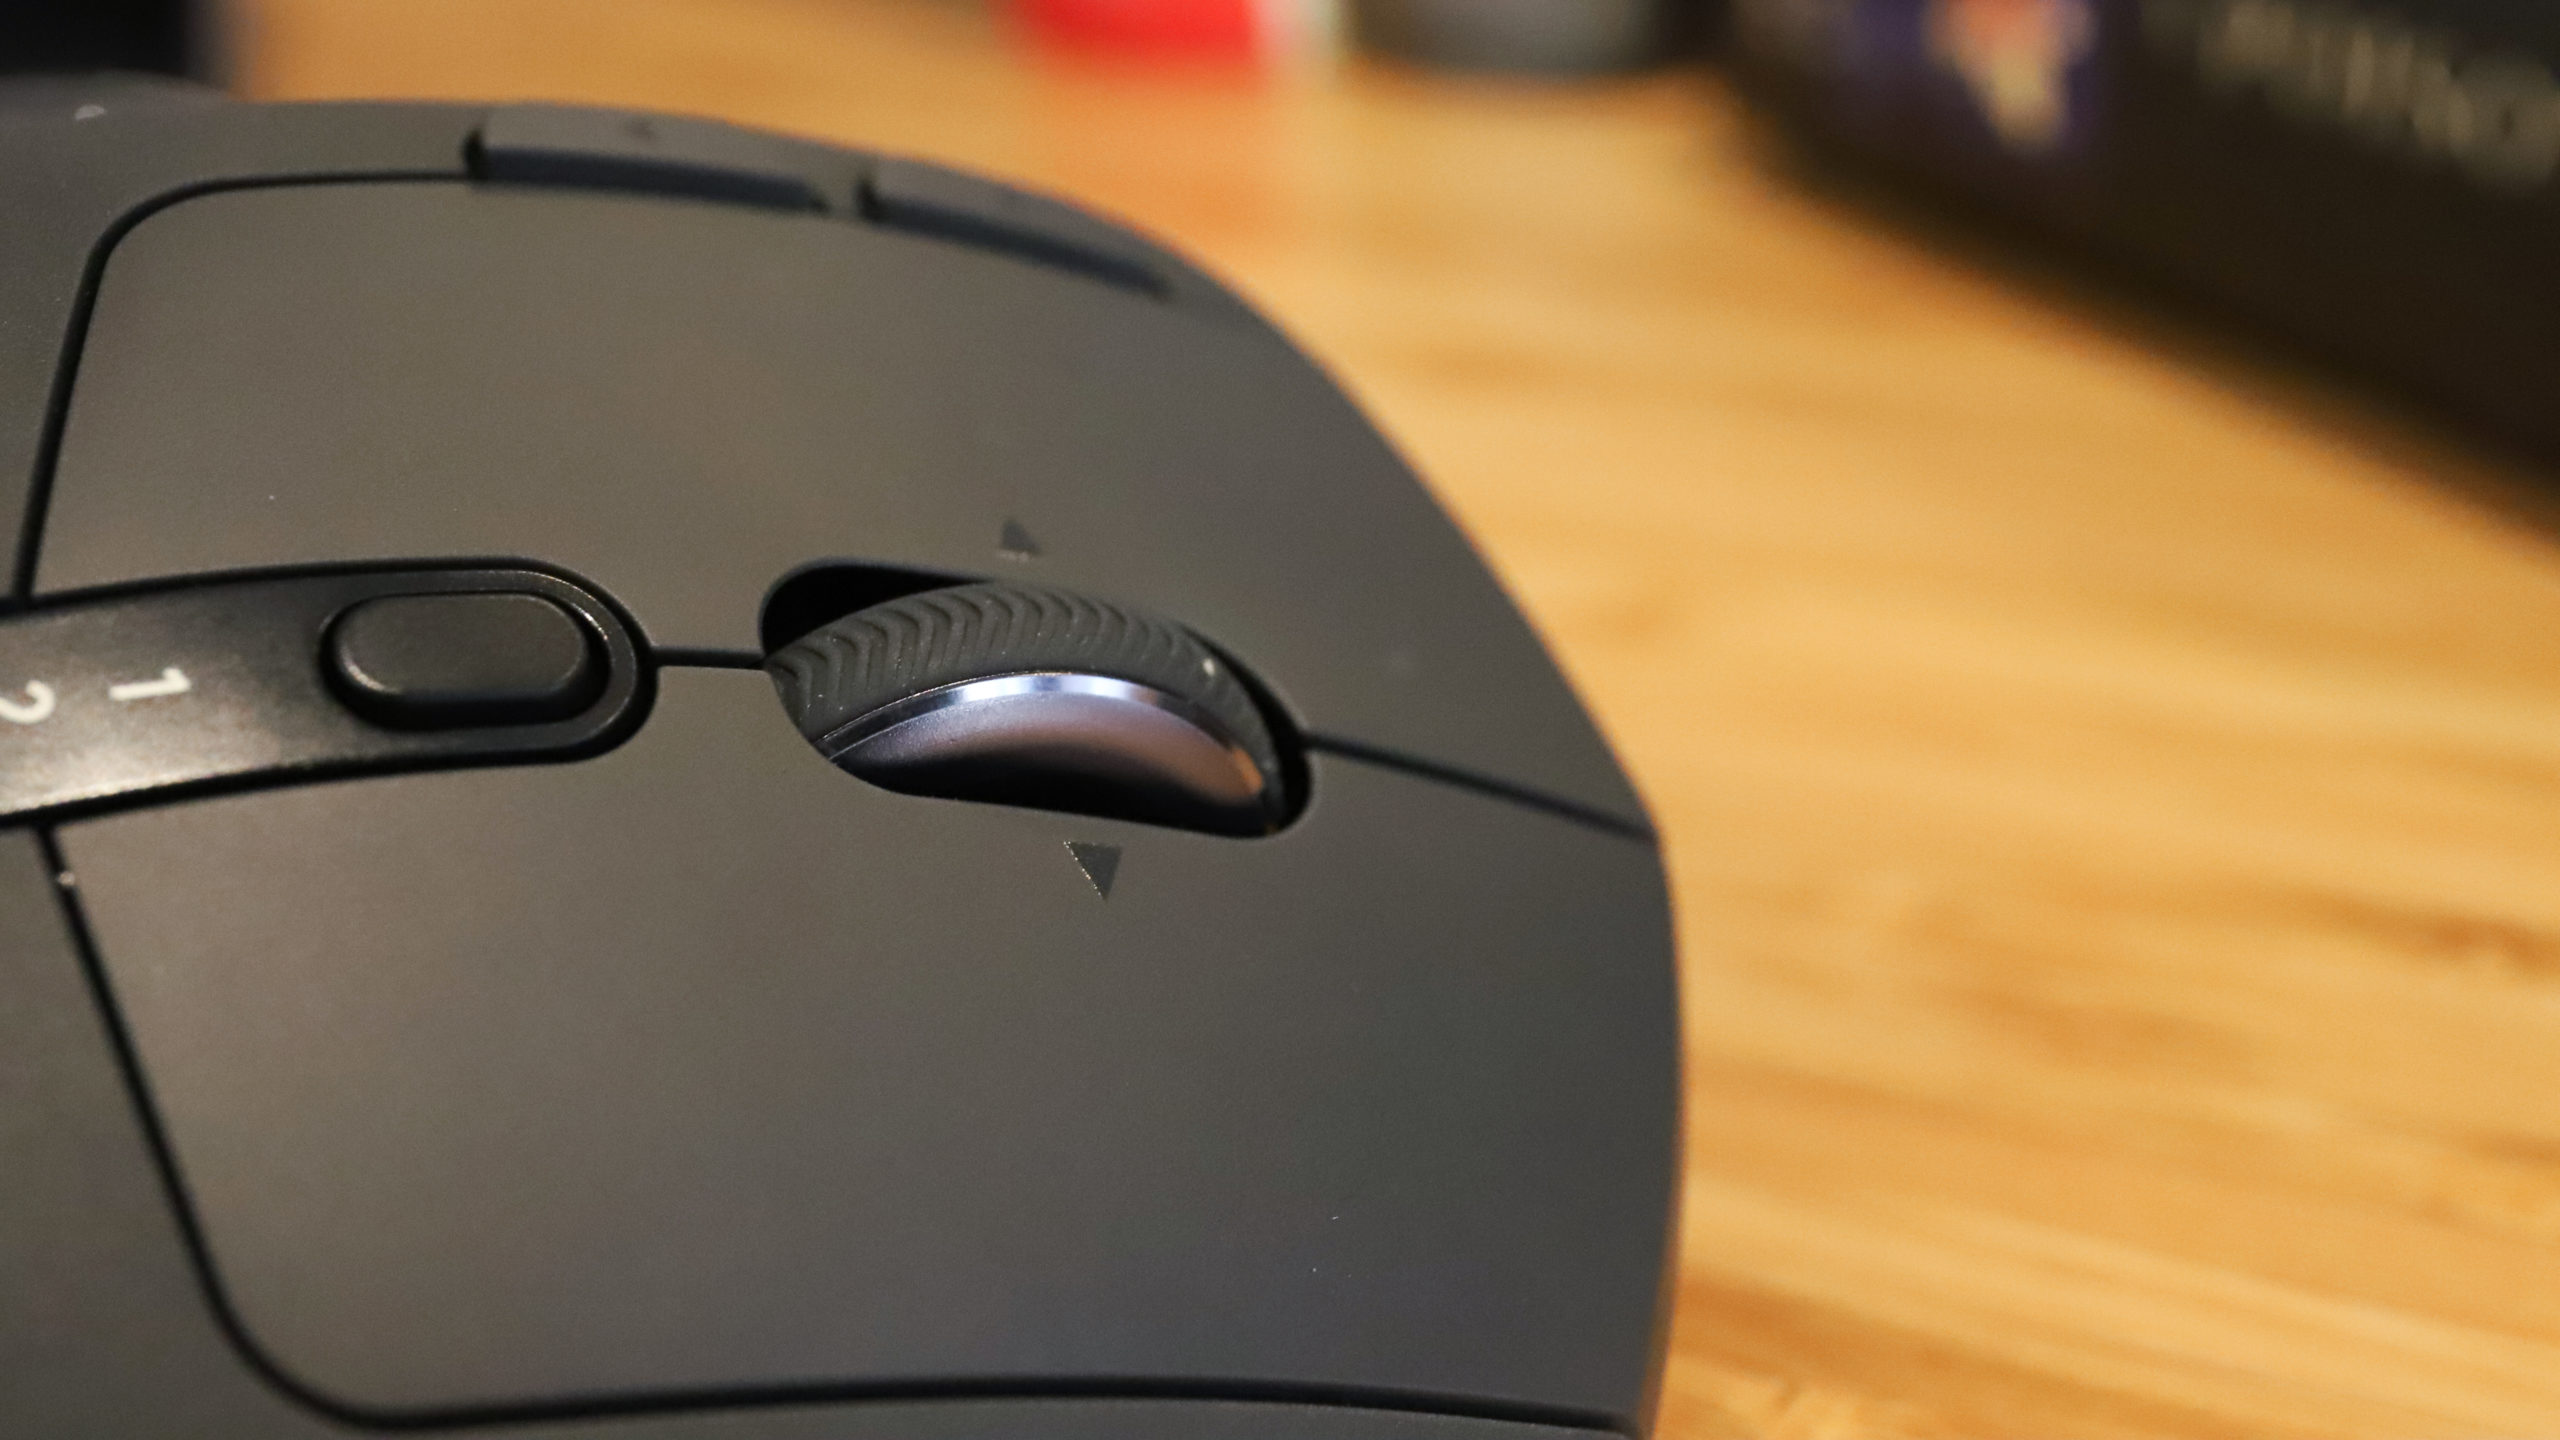 Why The Hell Would Anyone Use A Trackball Mouse?